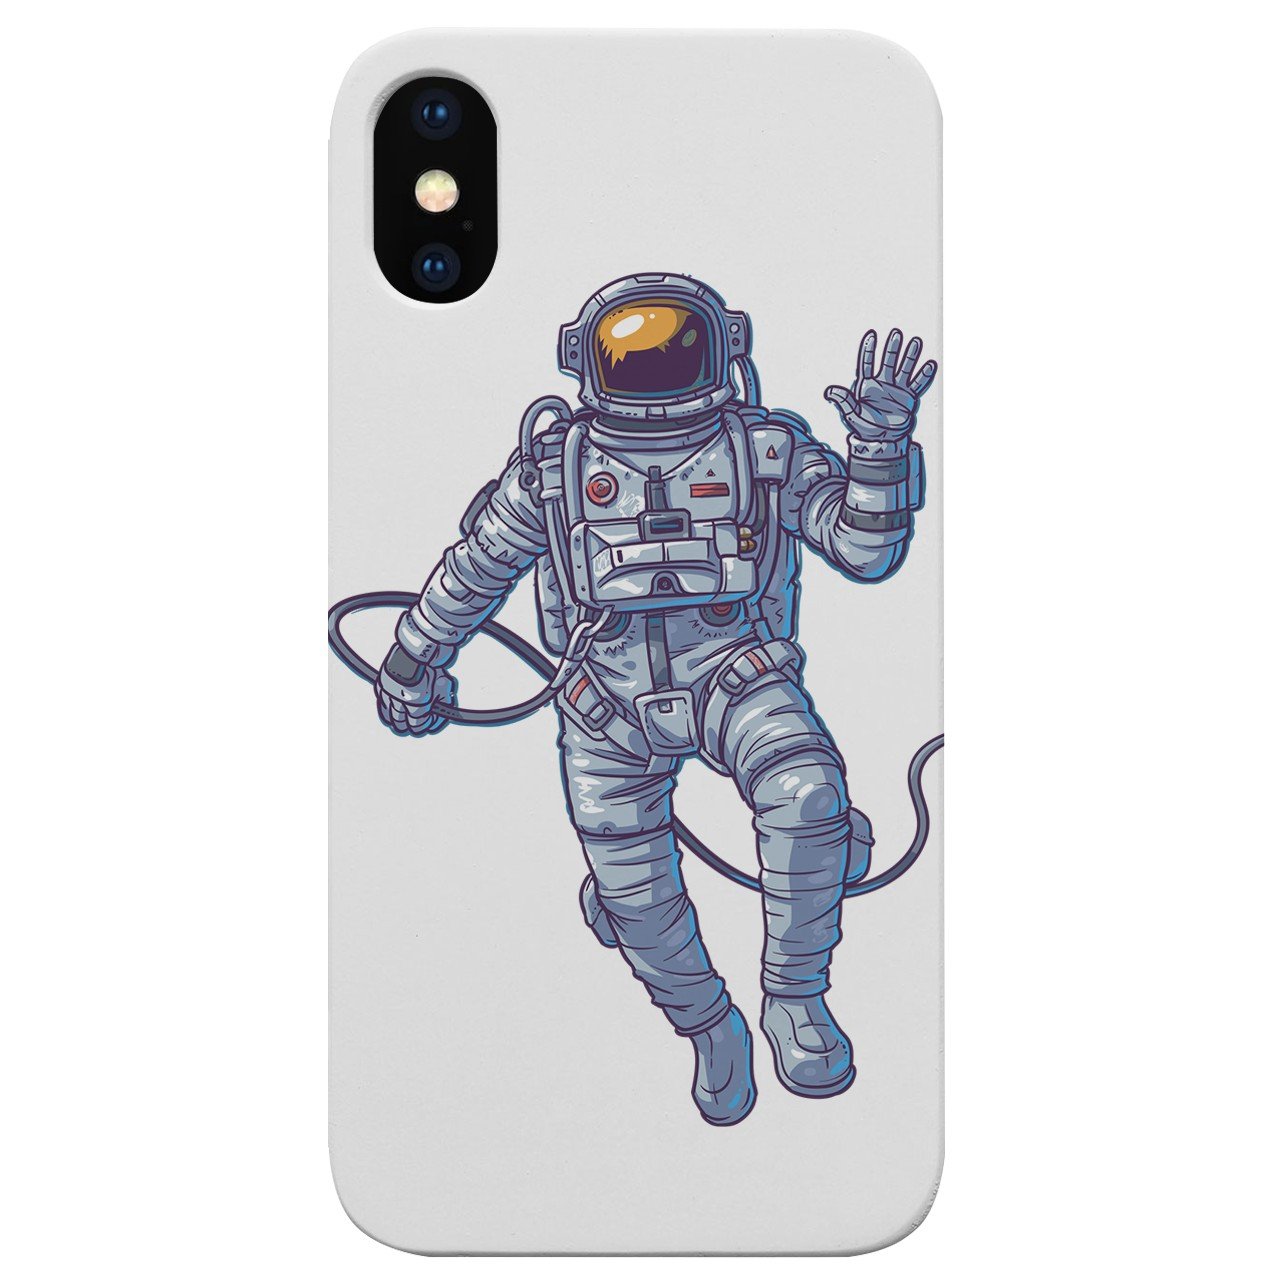 Astronaut - Engraved - Wooden Phone Case